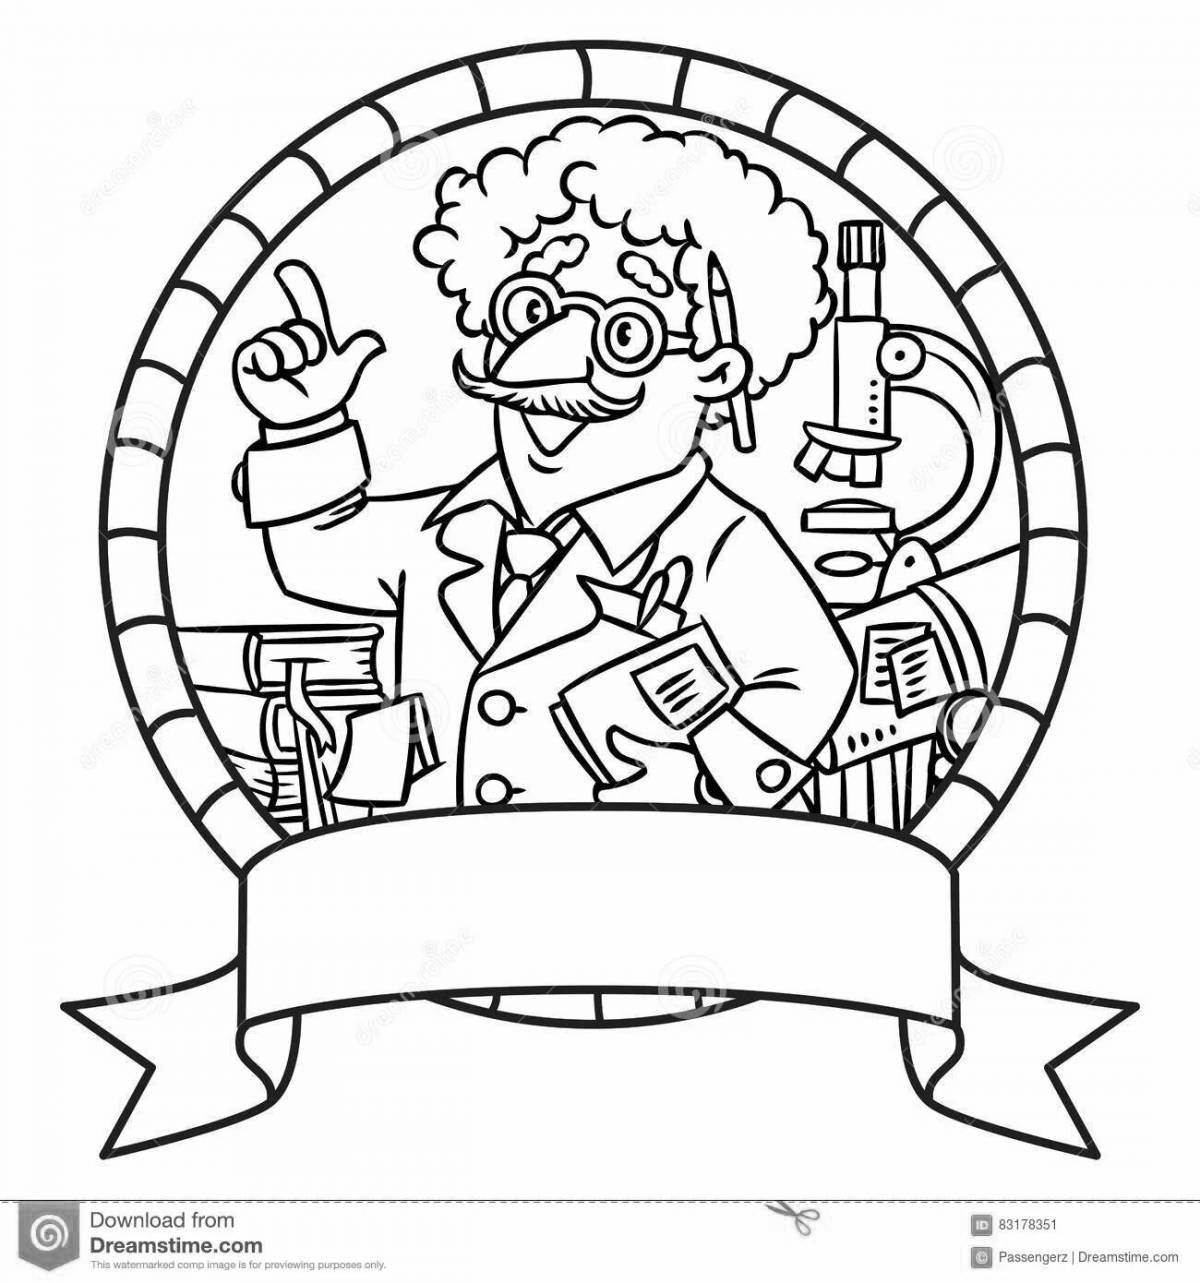 Coloring page whimsical children's inventions